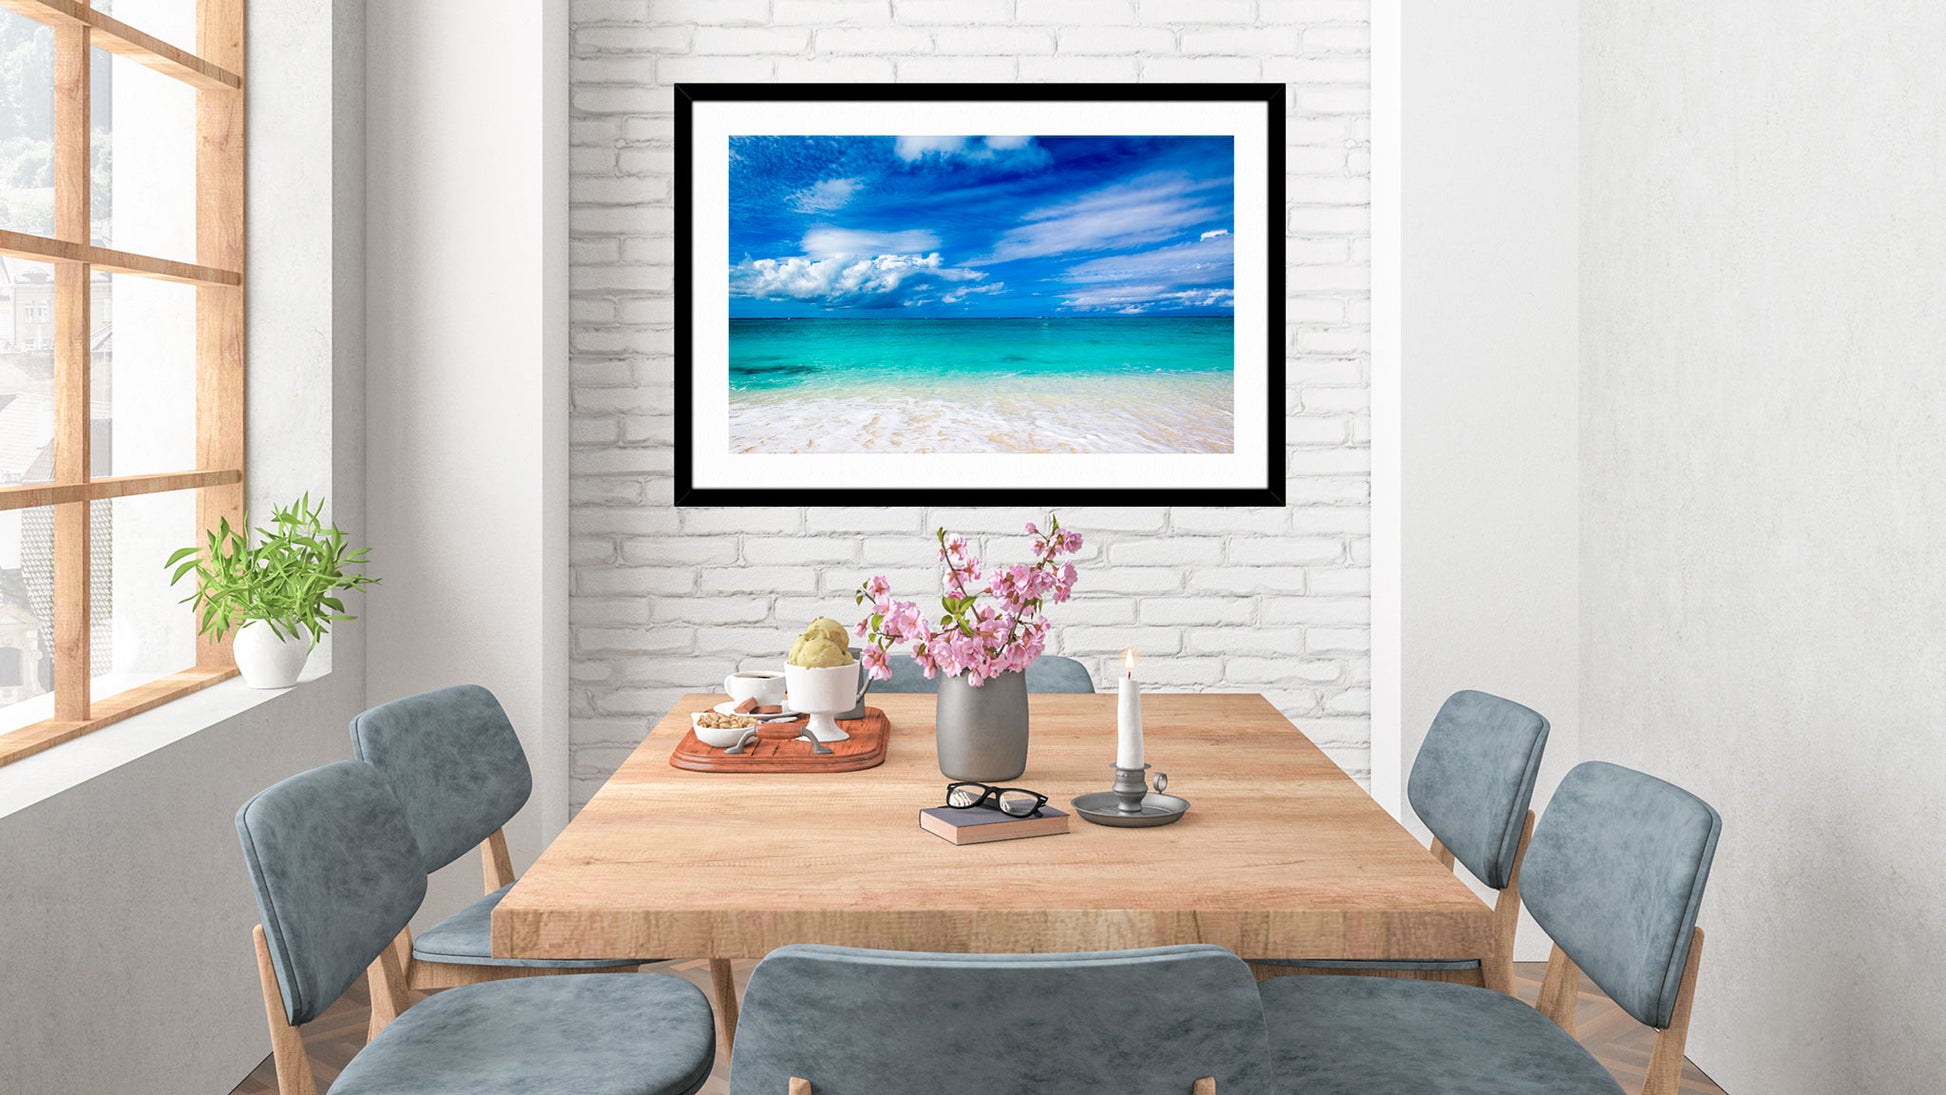 White Sand Beach - Framed Photograph on Dining Room Wall